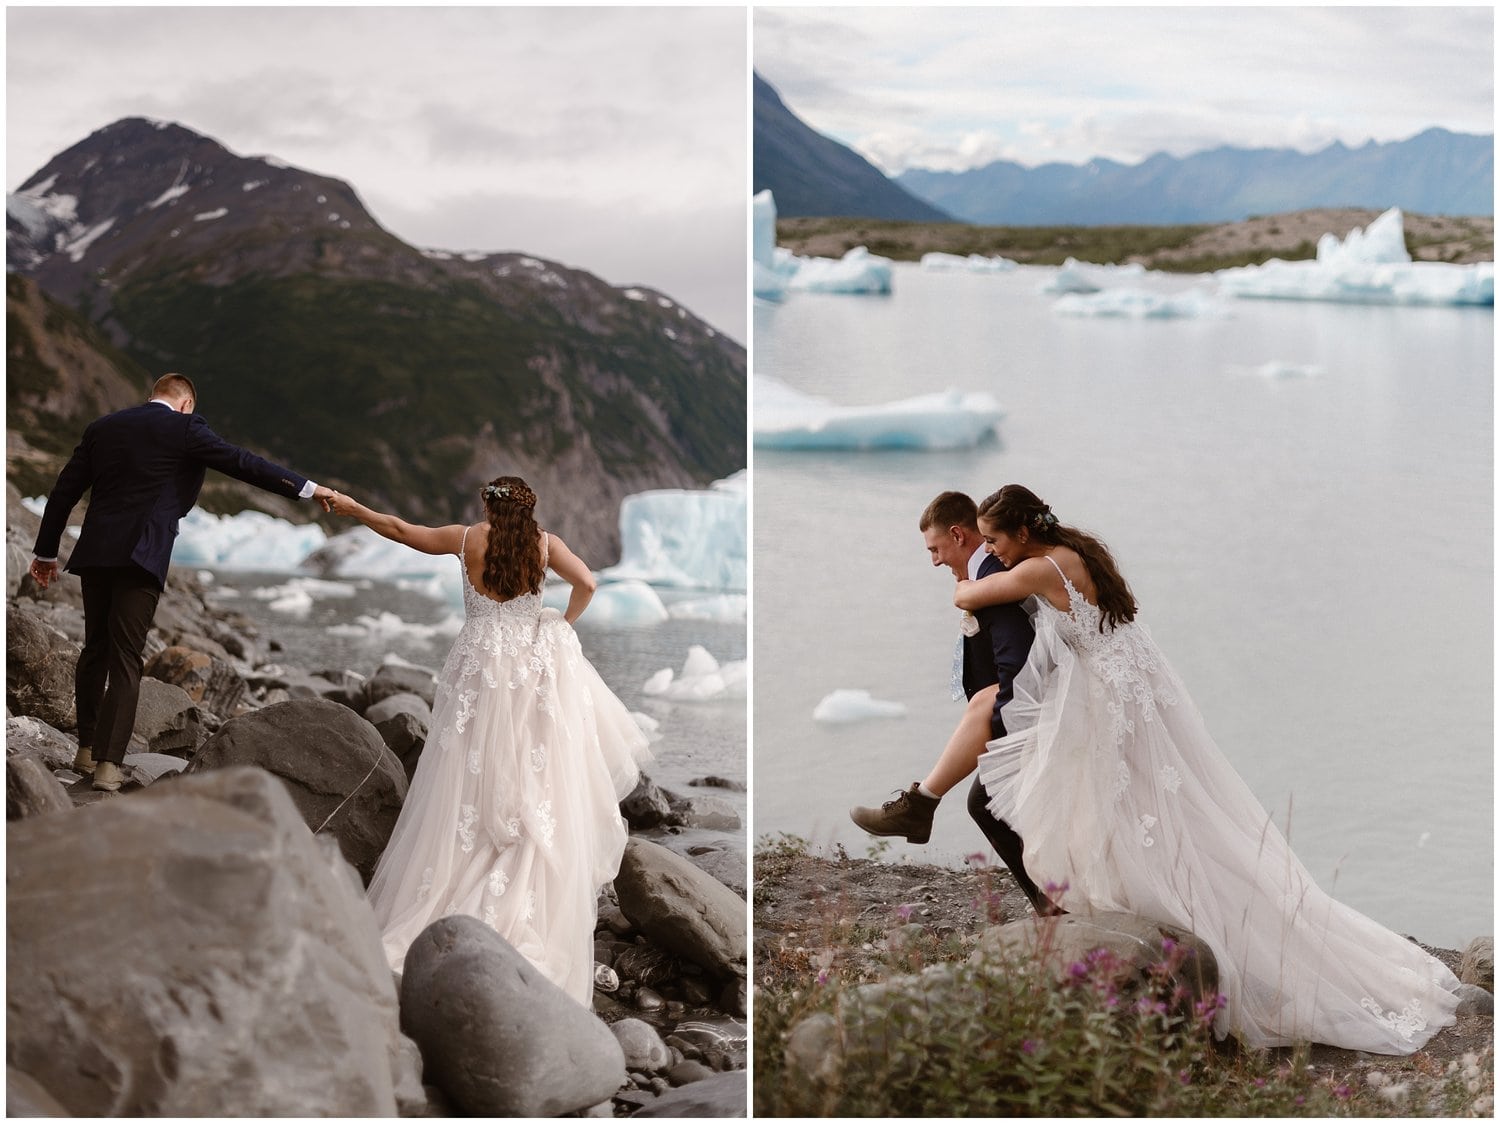 Bride and groom walk across rocks in front on glacial lake with icebergs in Alaska.